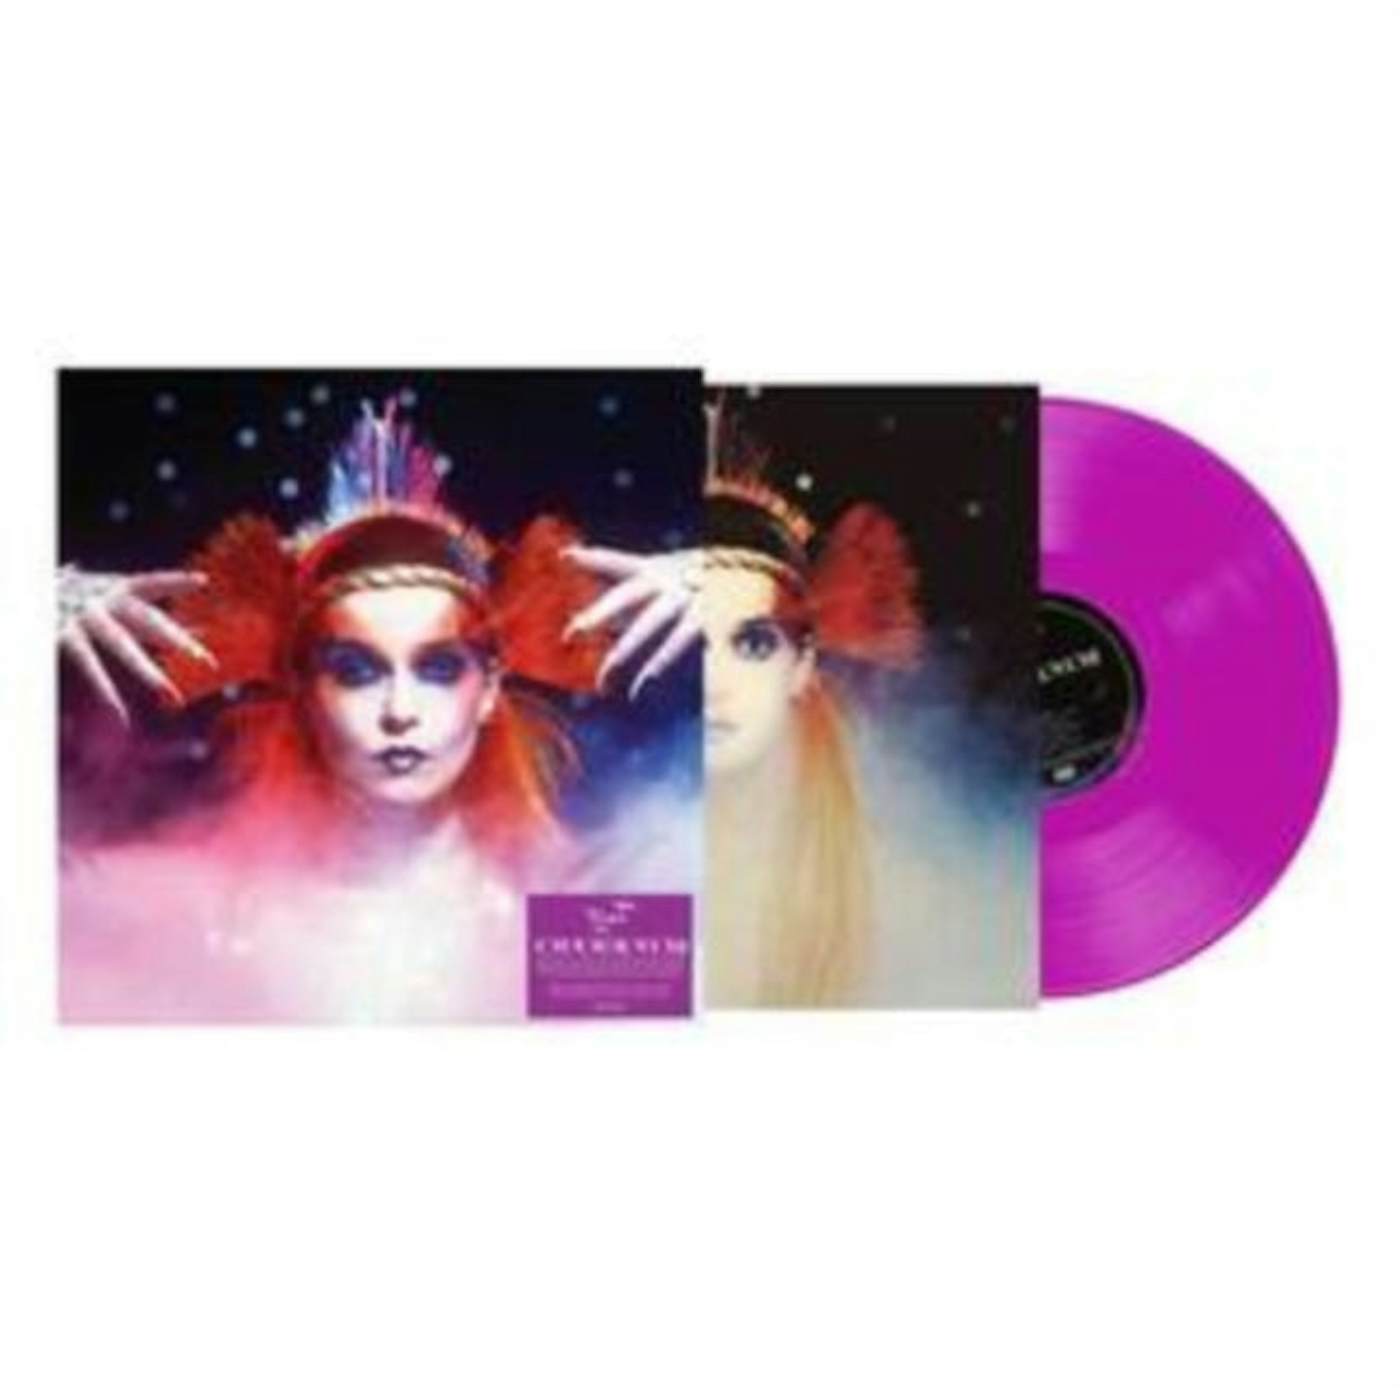 Toyah LP Vinyl Record - Four More From Toyah (Expanded Edition) (Neon Violet Vinyl)